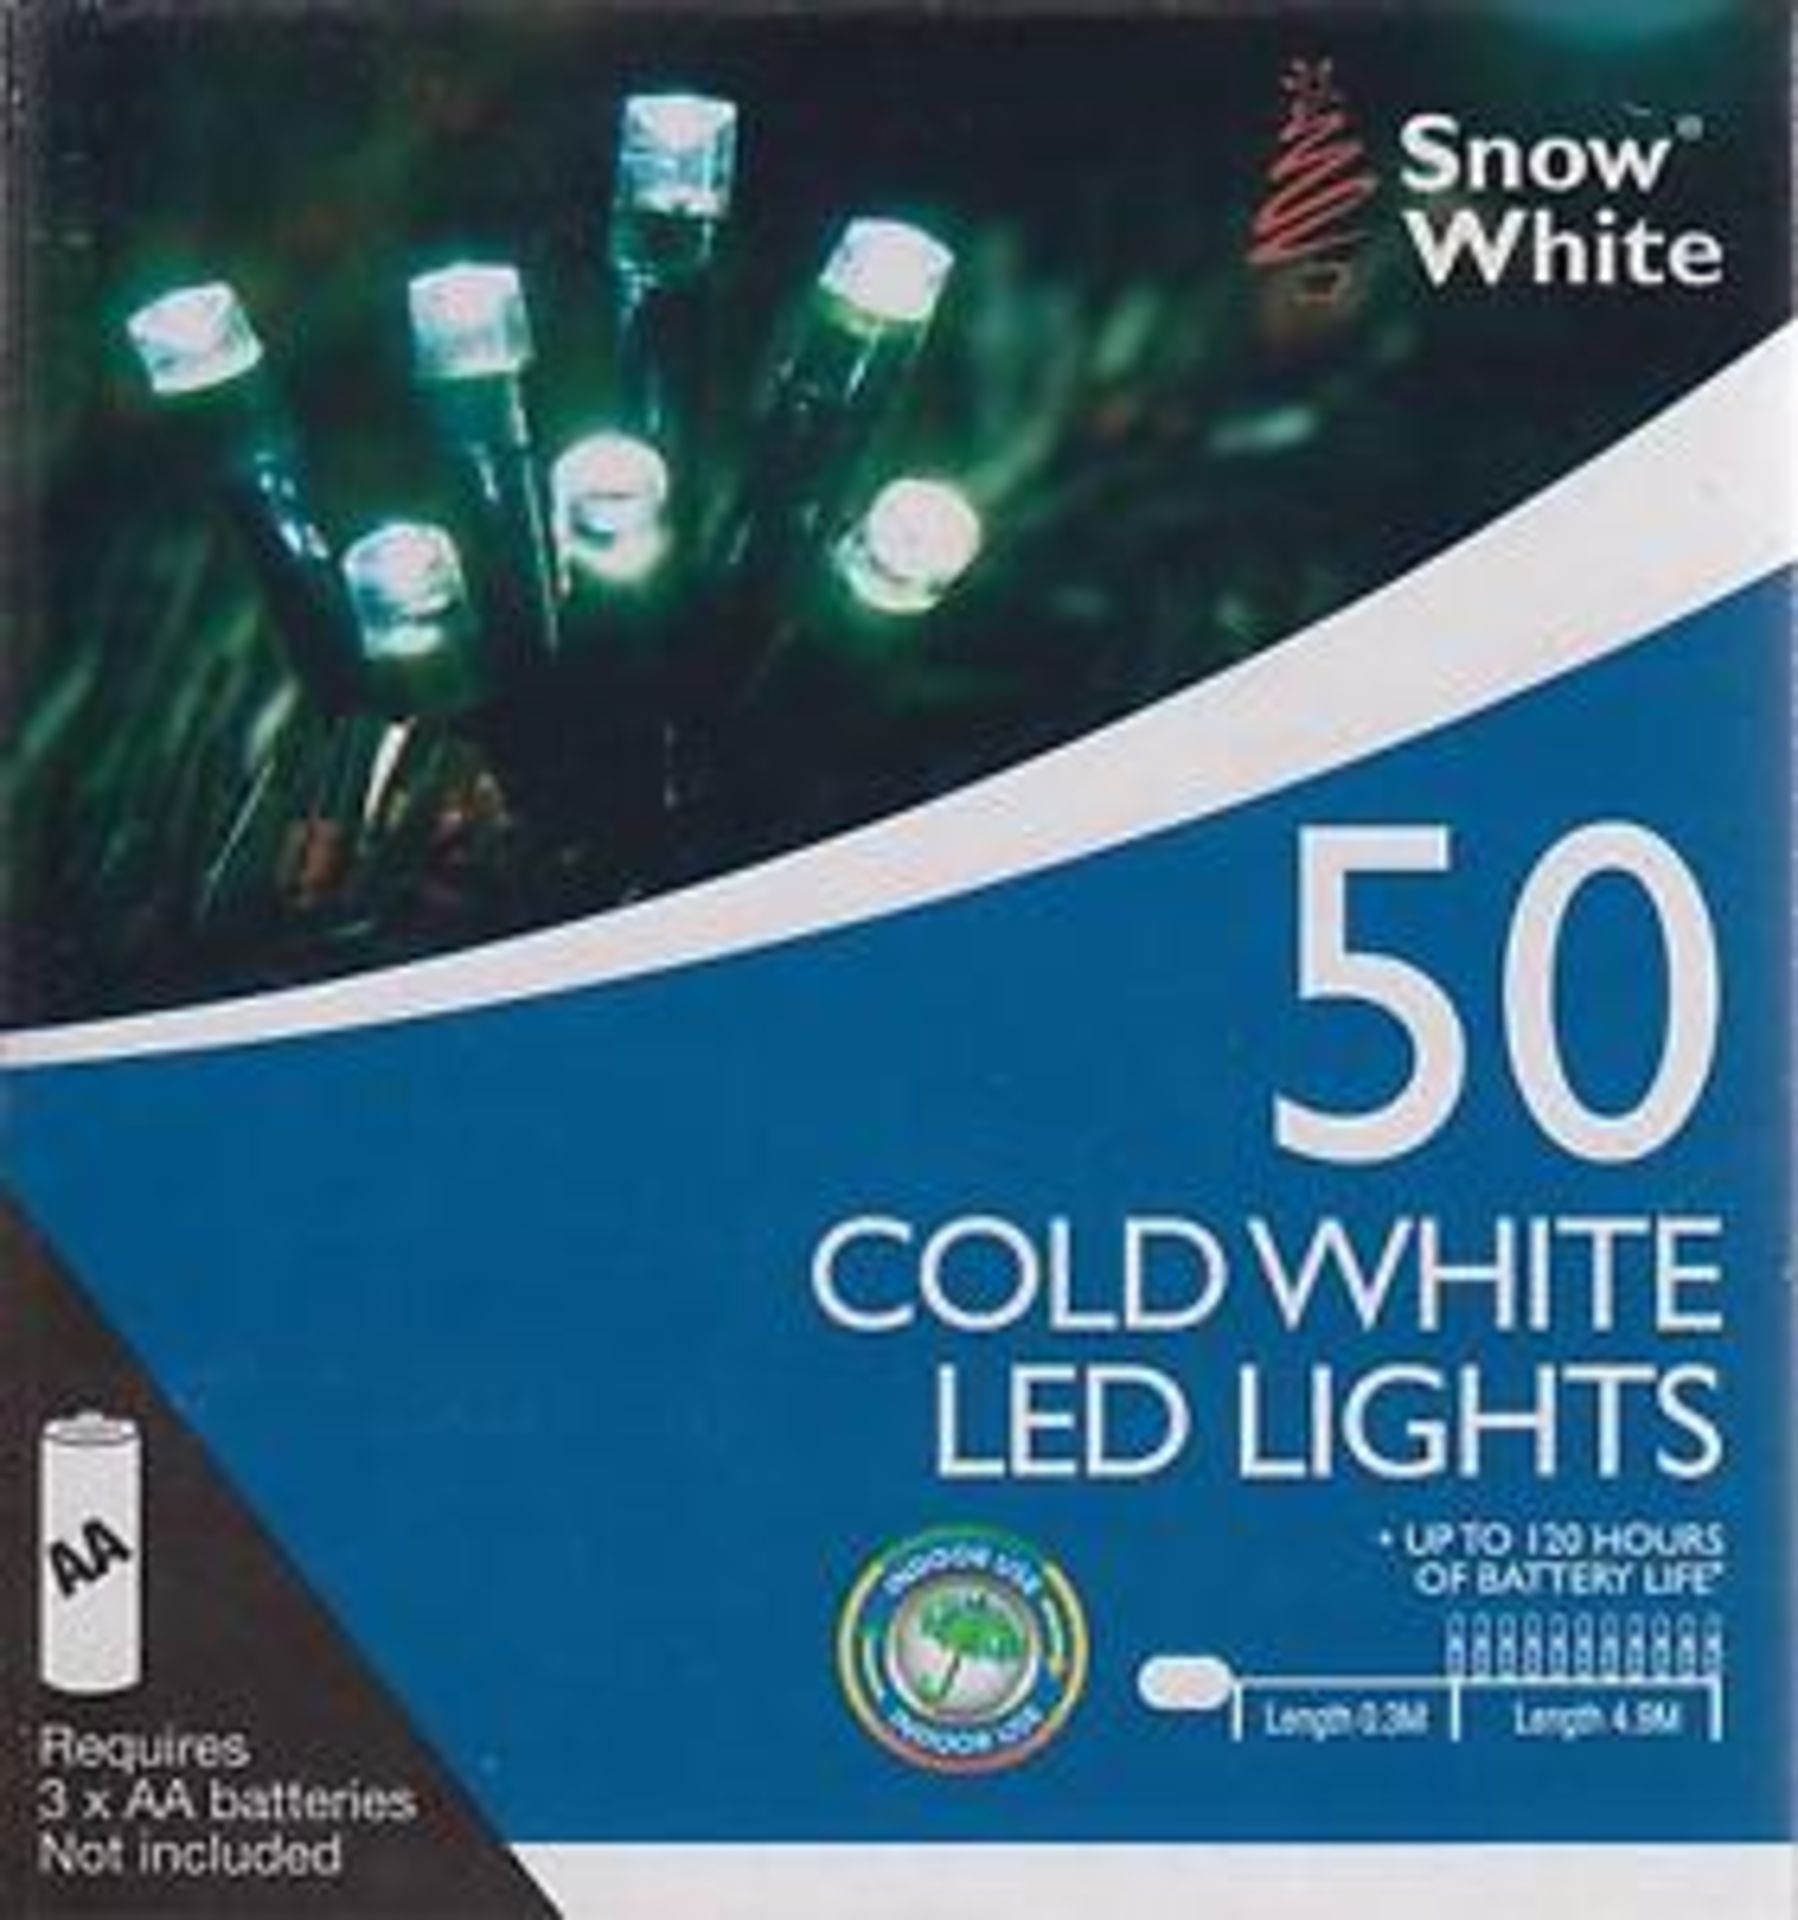 V *TRADE QTY* Brand New Box Of 50 Cold White (Bright) LED Christmas Lights X 5 YOUR BID PRICE TO